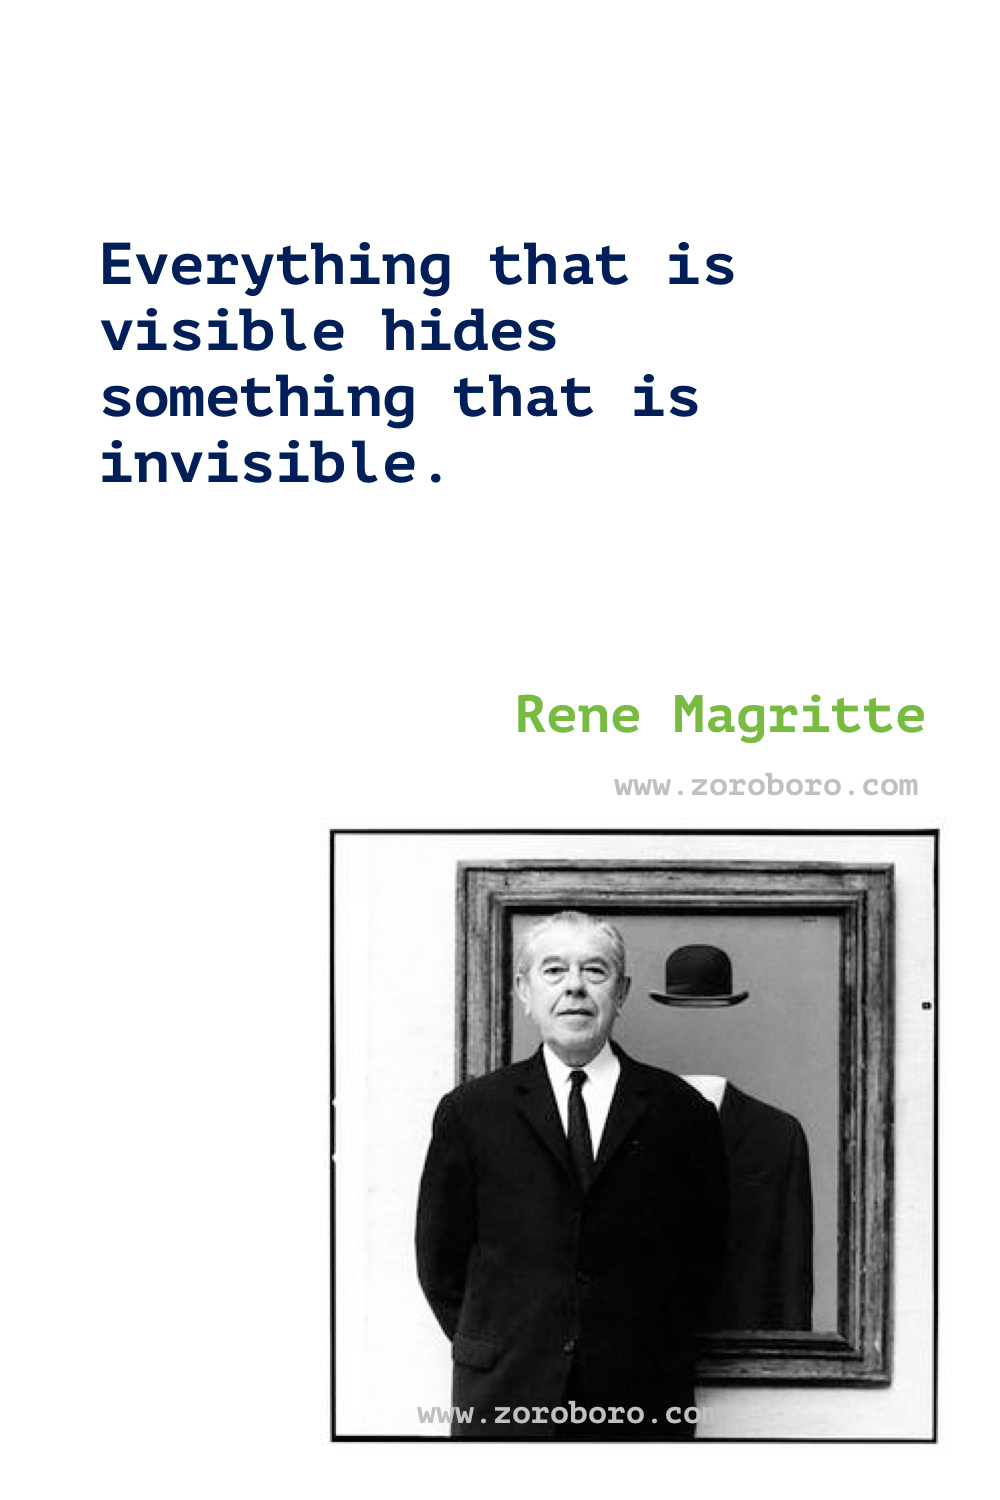 Rene Magritte Quotes. Rene Magritte Art Quotes. Rene Magritte Painting Quotes. Rene Magritte Mystery Quotes. Rene Magritte